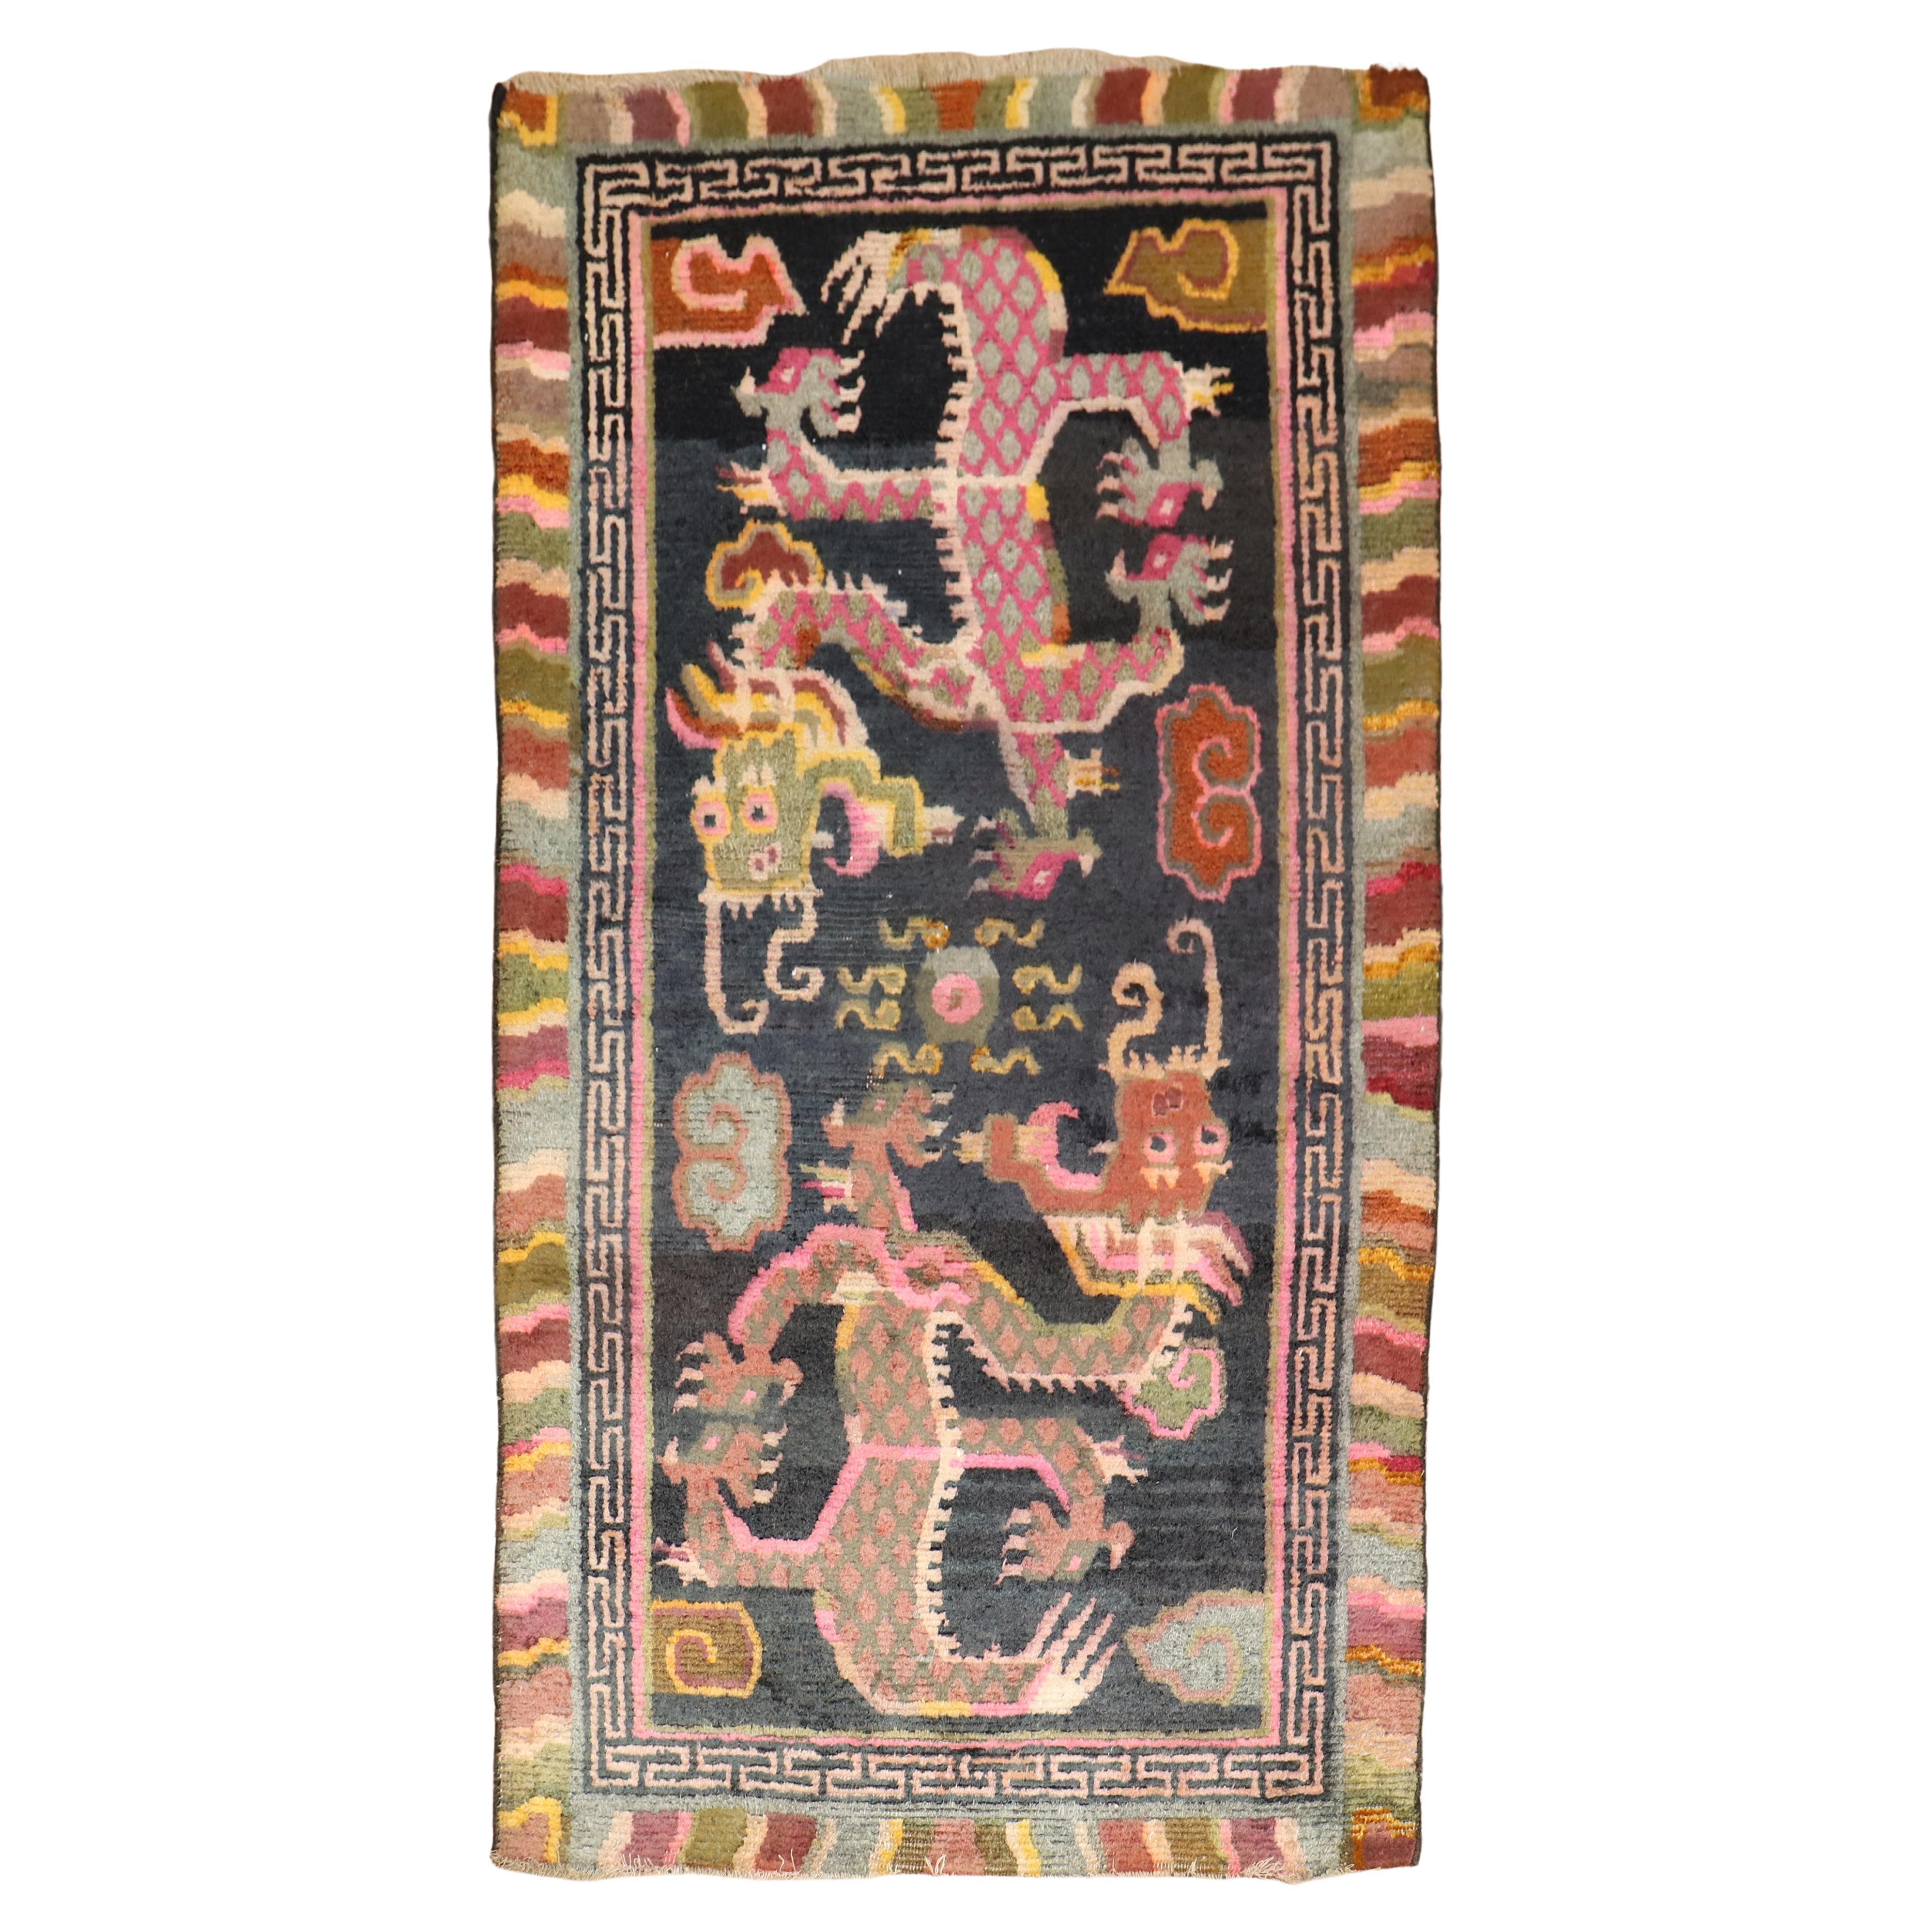 Archaistic Central Asian Rugs